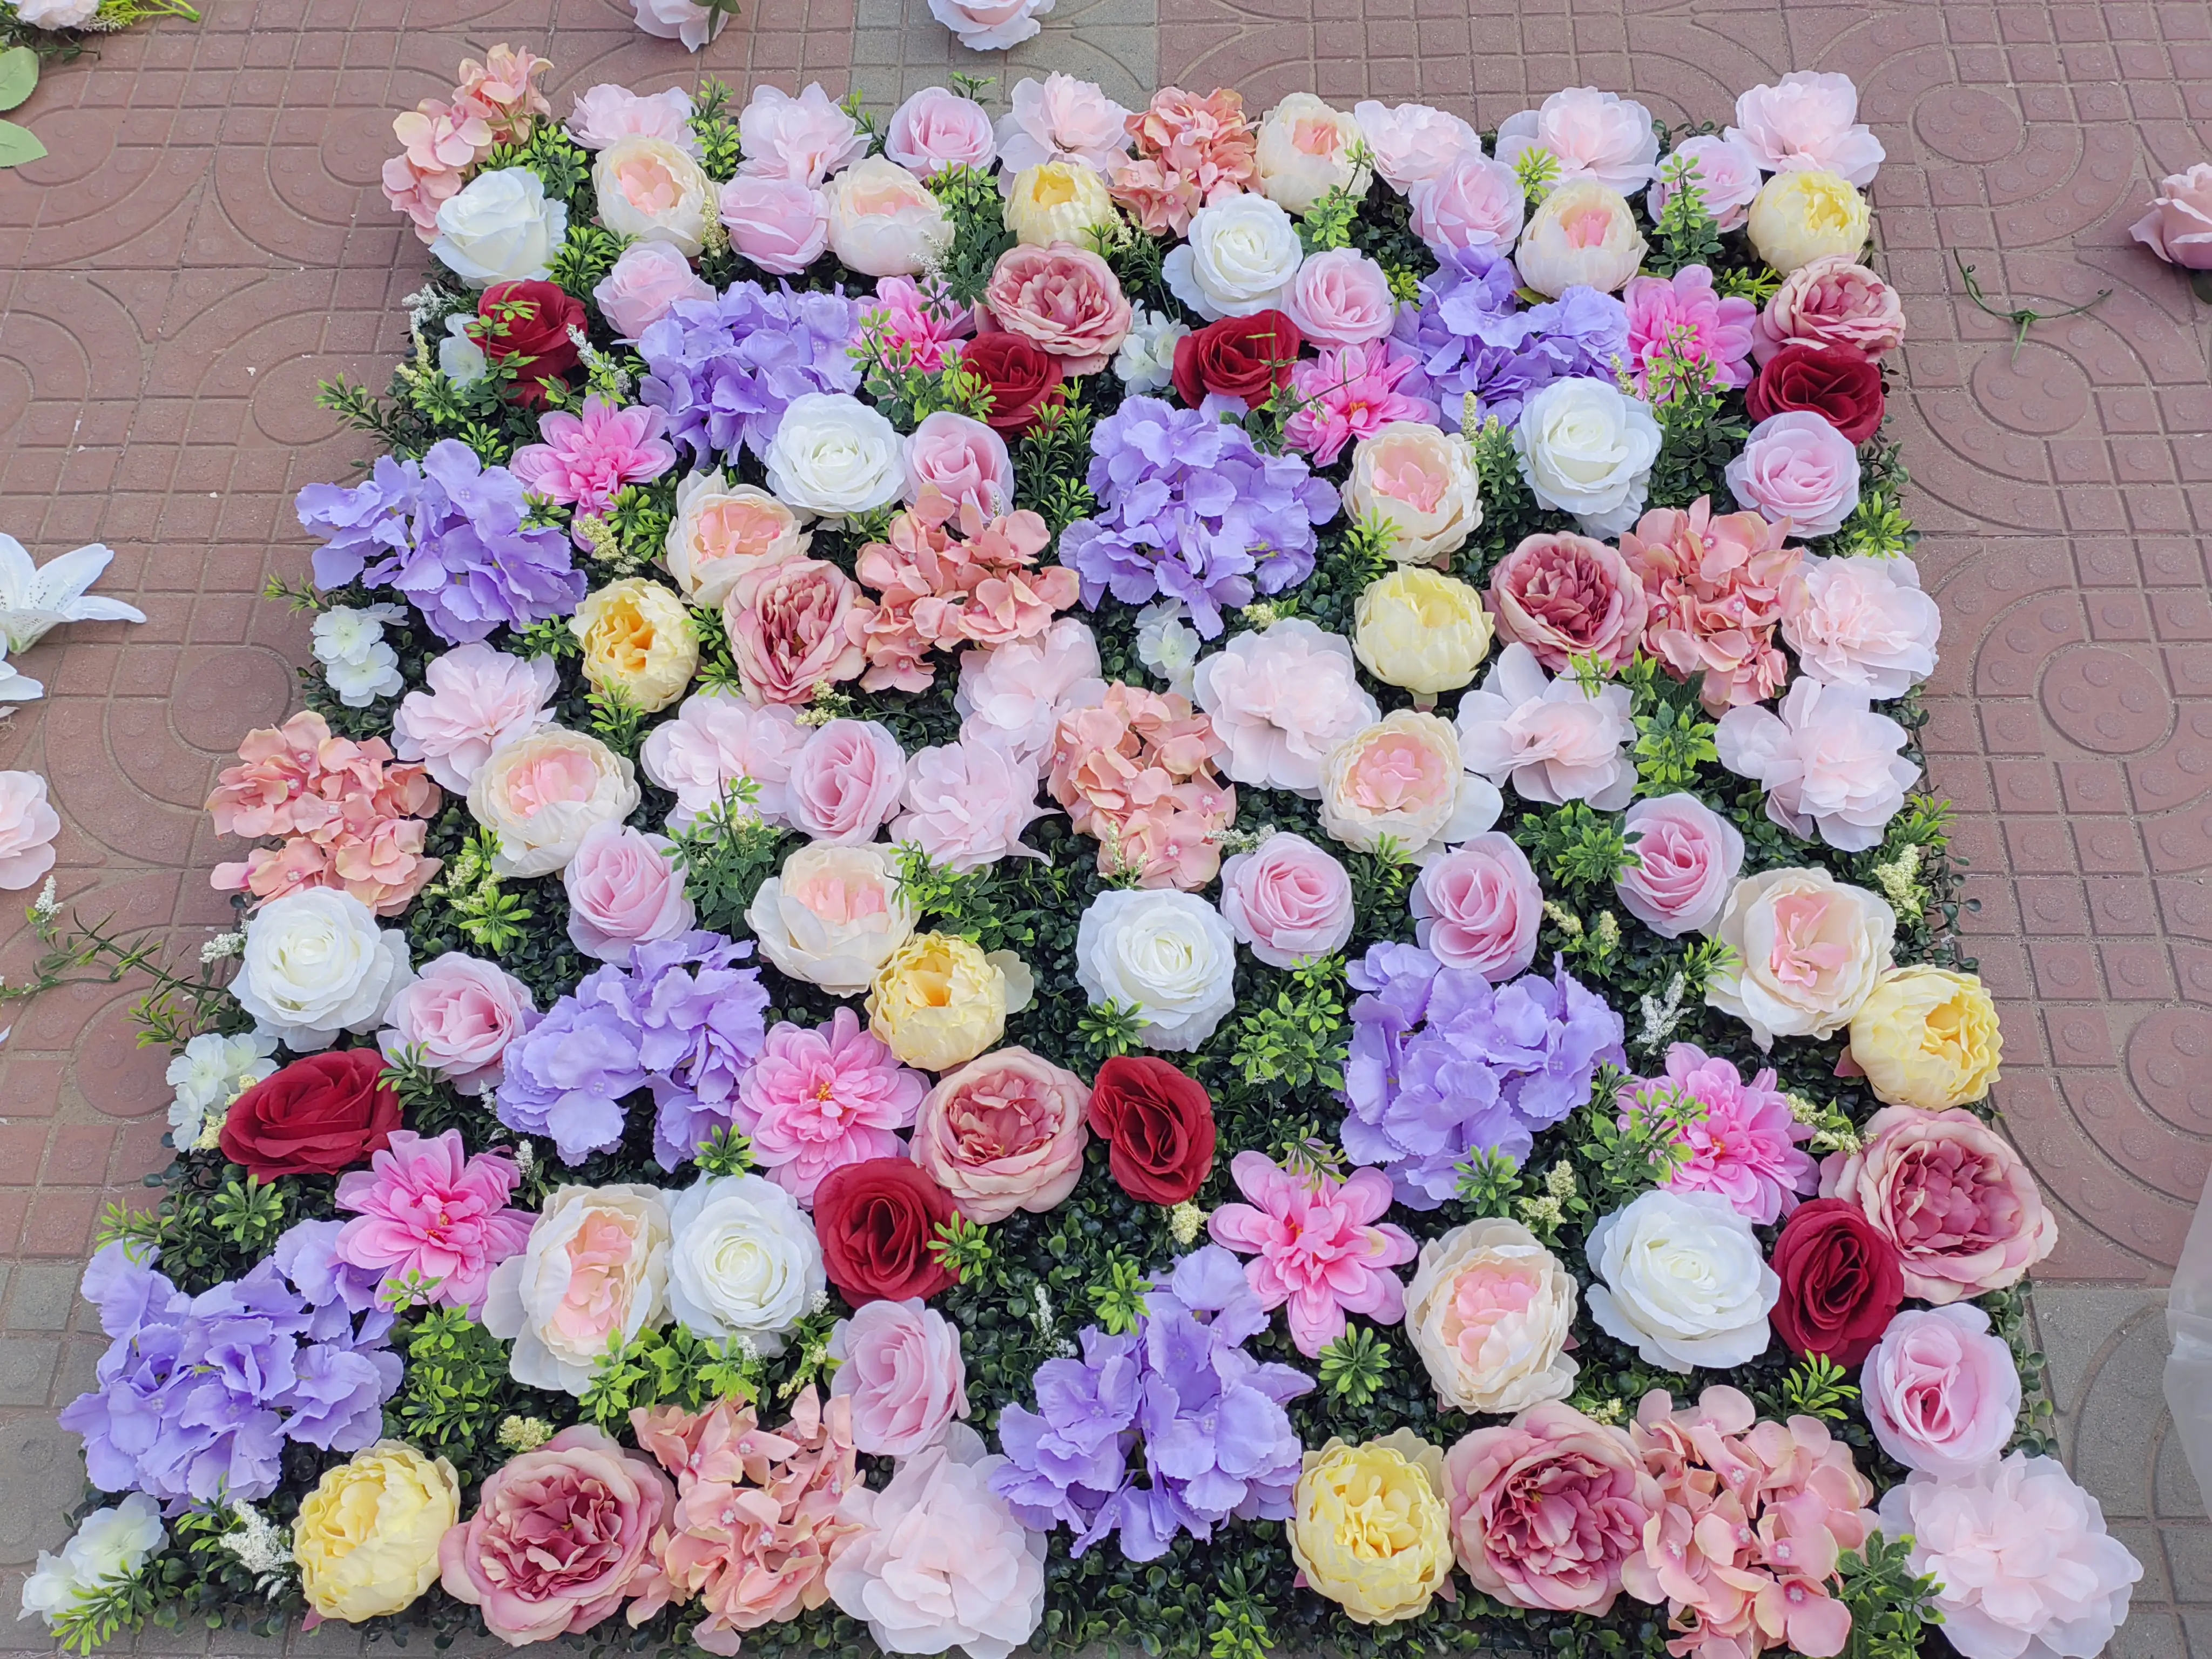 Wholesale Artificial Fabric Artificial Roll Pink White Flower Wall Backdrop Panels Wall for Wedding Event Decorations